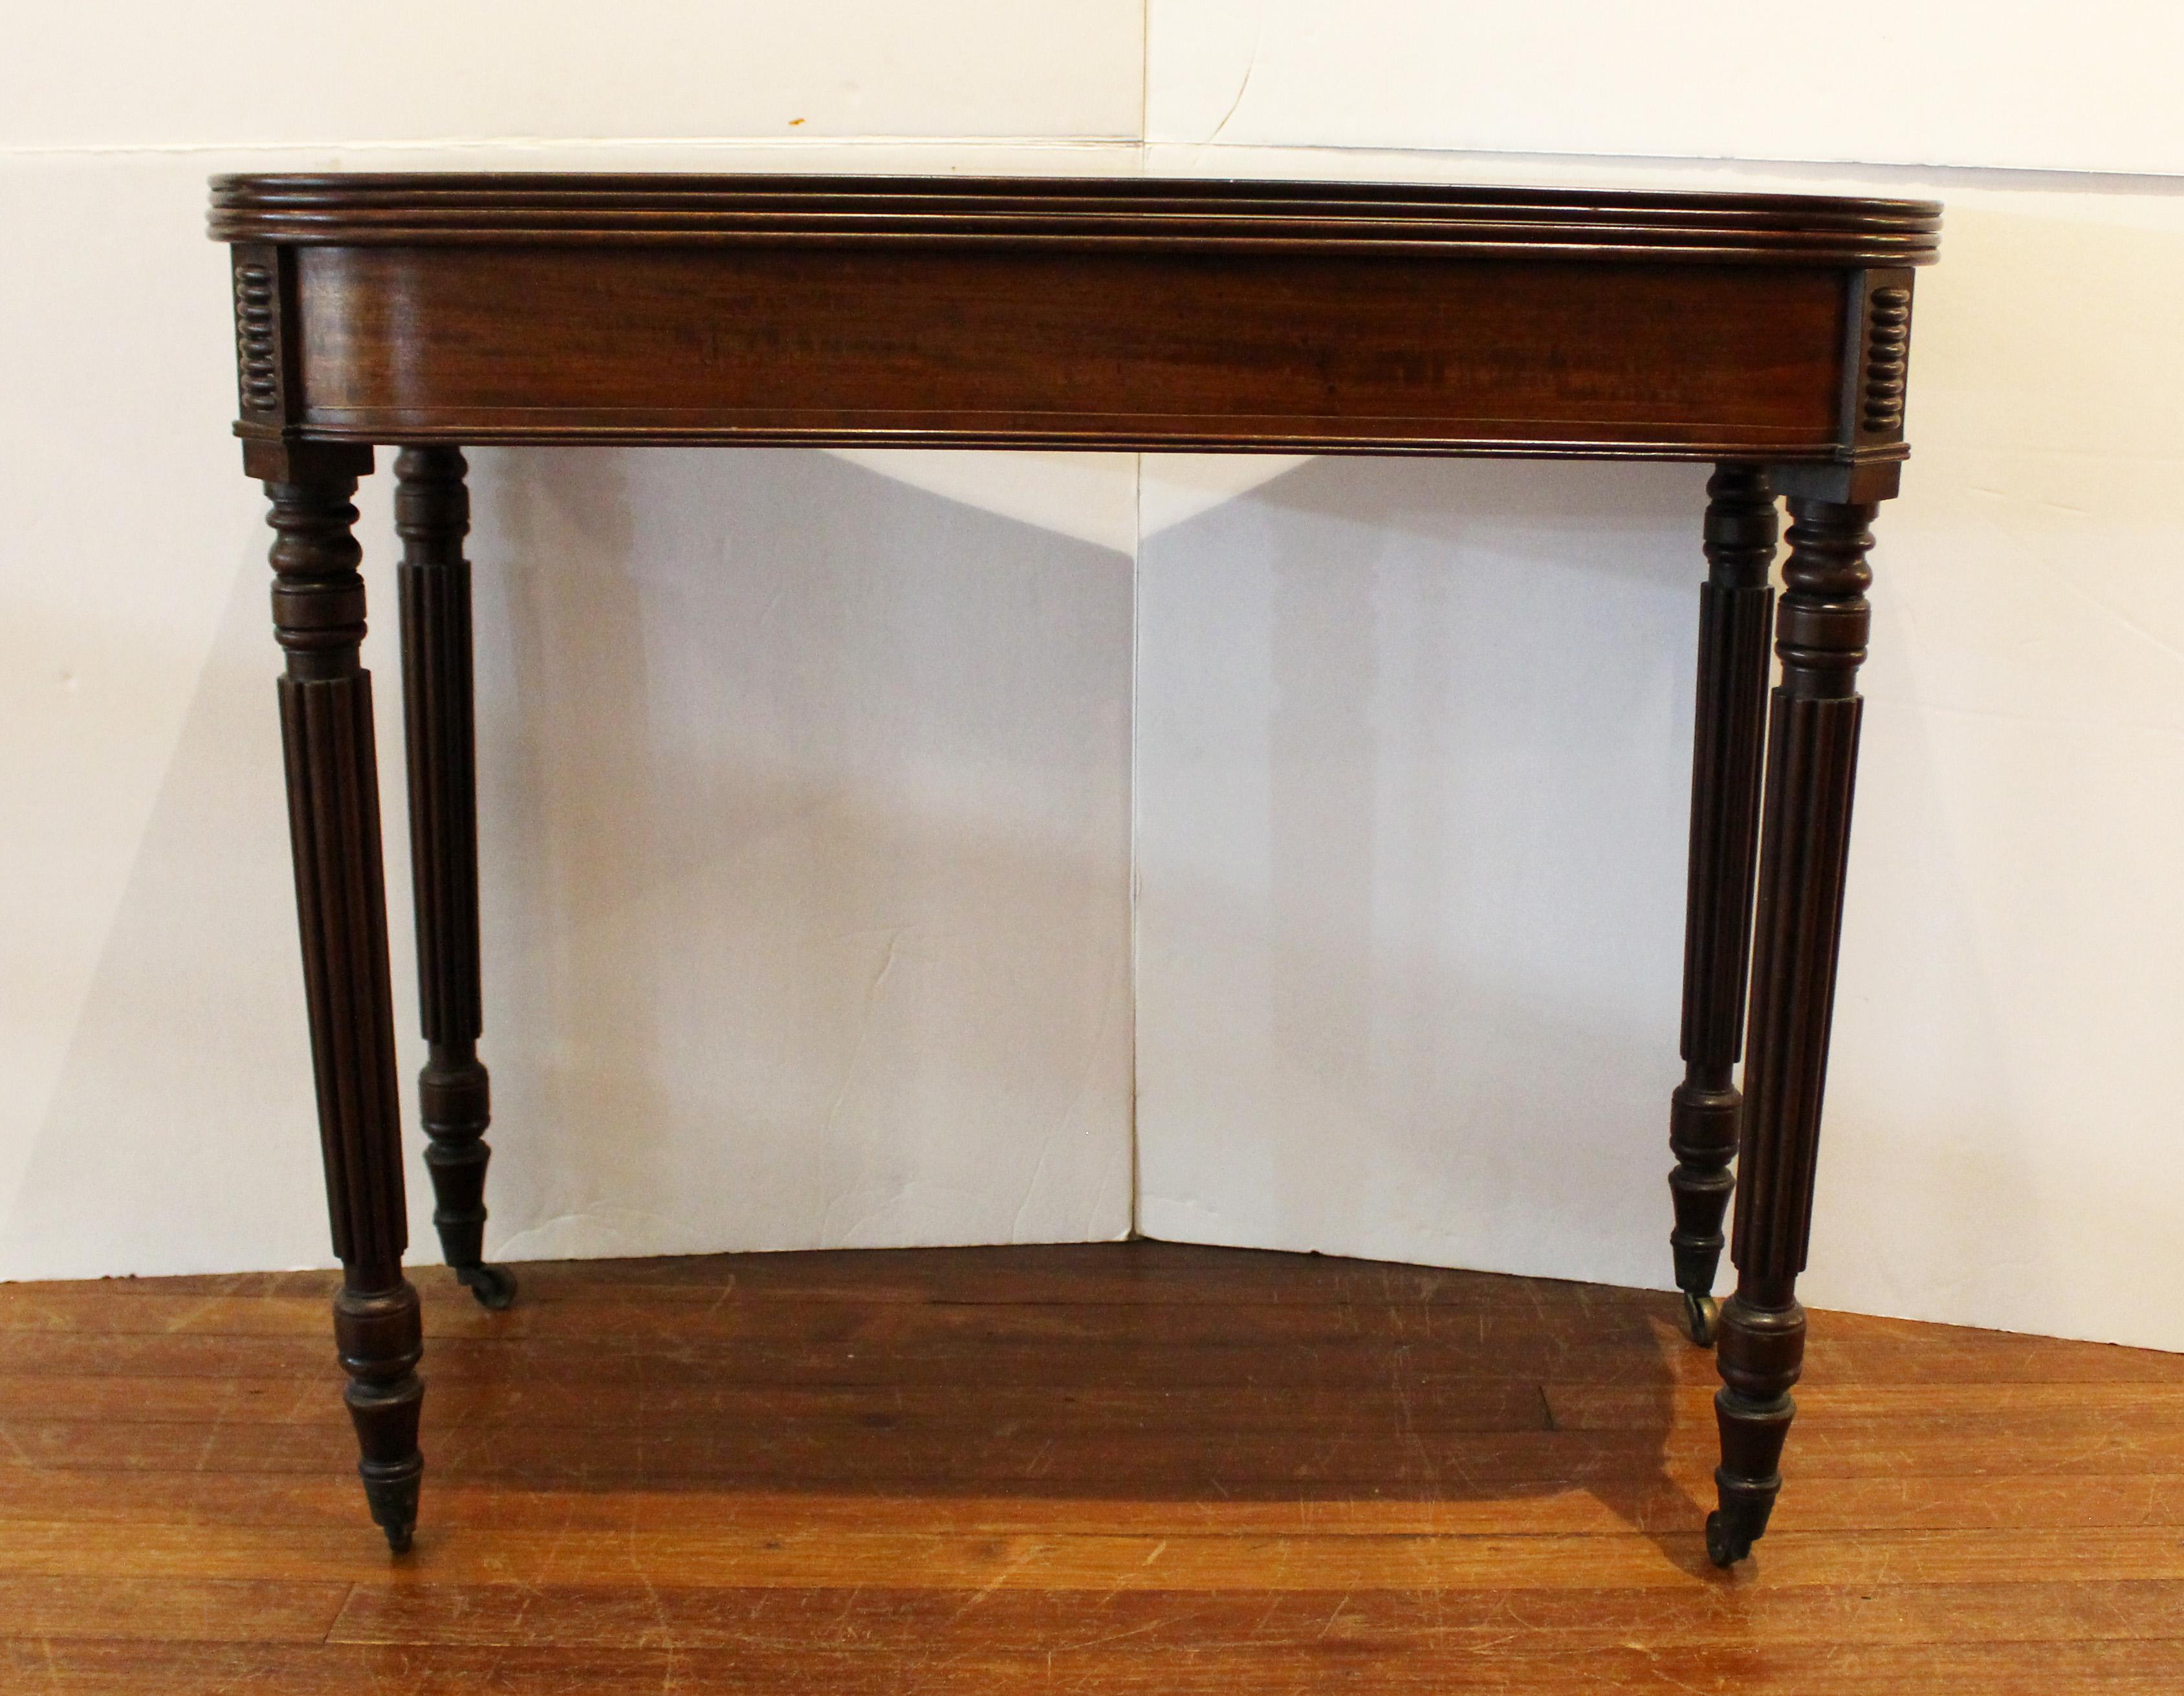 George IV to William IV c.1820-30 fold-top tea table, English. Console table form. Well figured, rich mahogany. Boldly reeded top, legs & corner friezes. Turned, tapered legs ending in brass caps & casters. Double gate legs swing out to support the